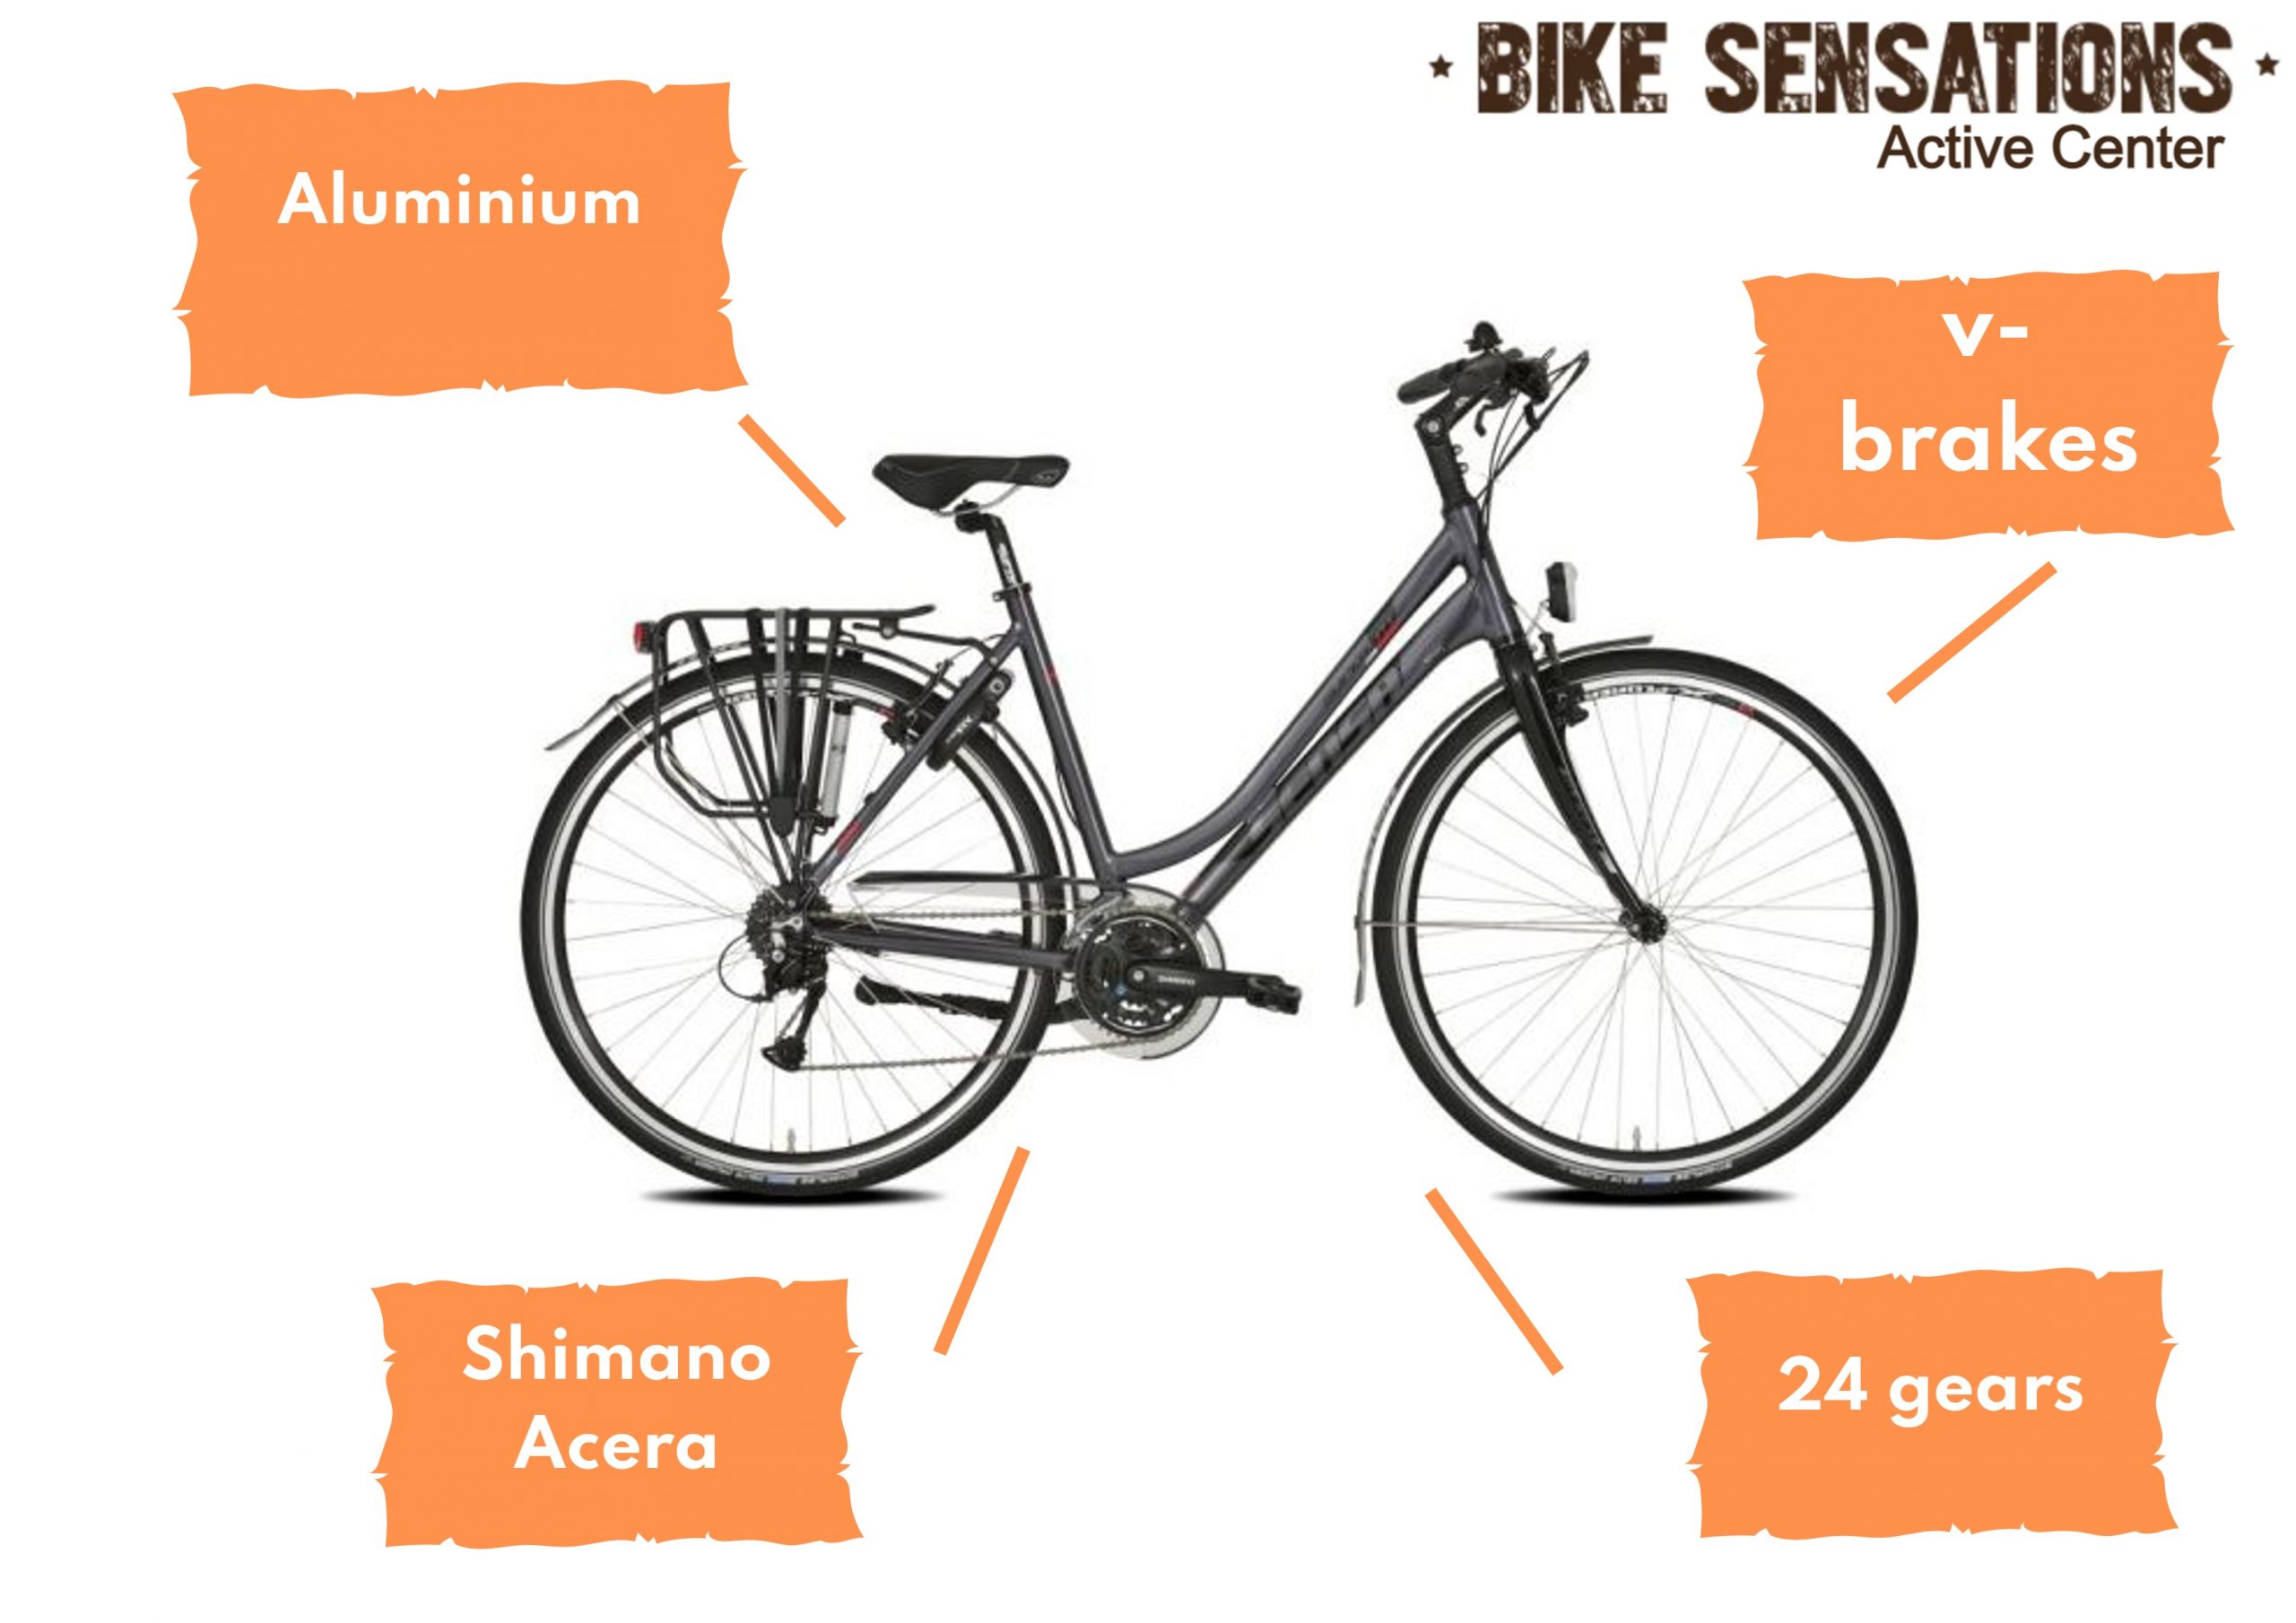 Information about the city bike